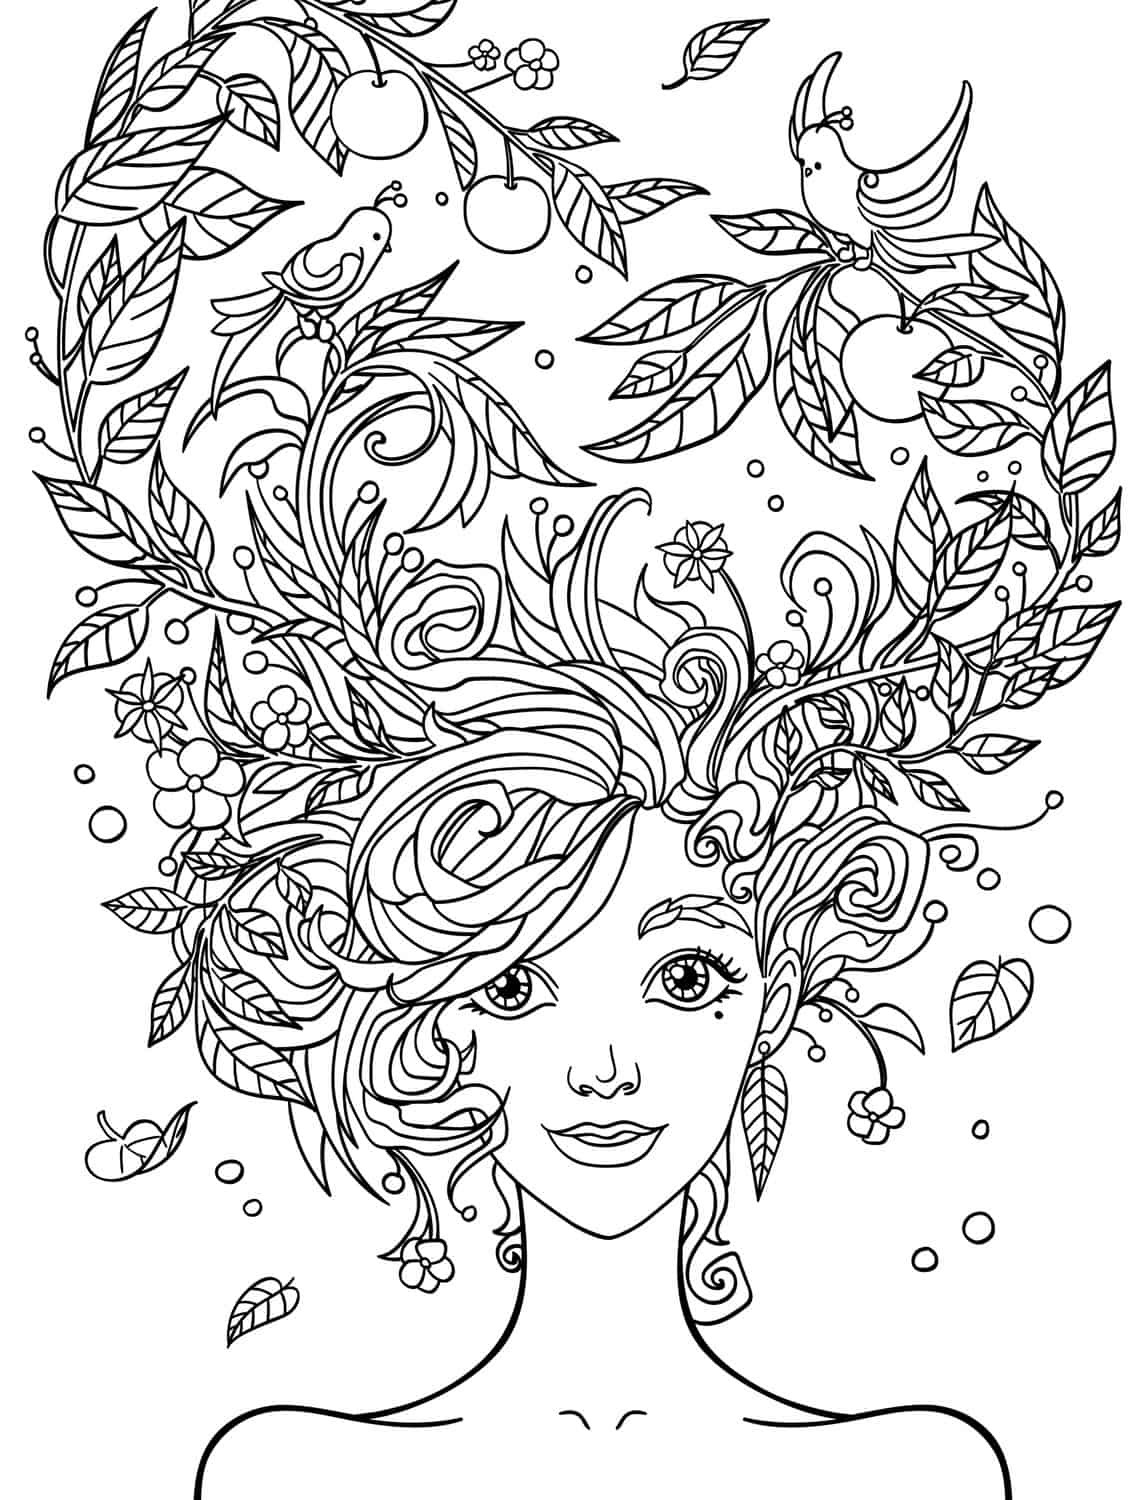 Girl Coloring Pages For Adults
 10 Crazy Hair Adult Coloring Pages Page 5 of 12 Nerdy